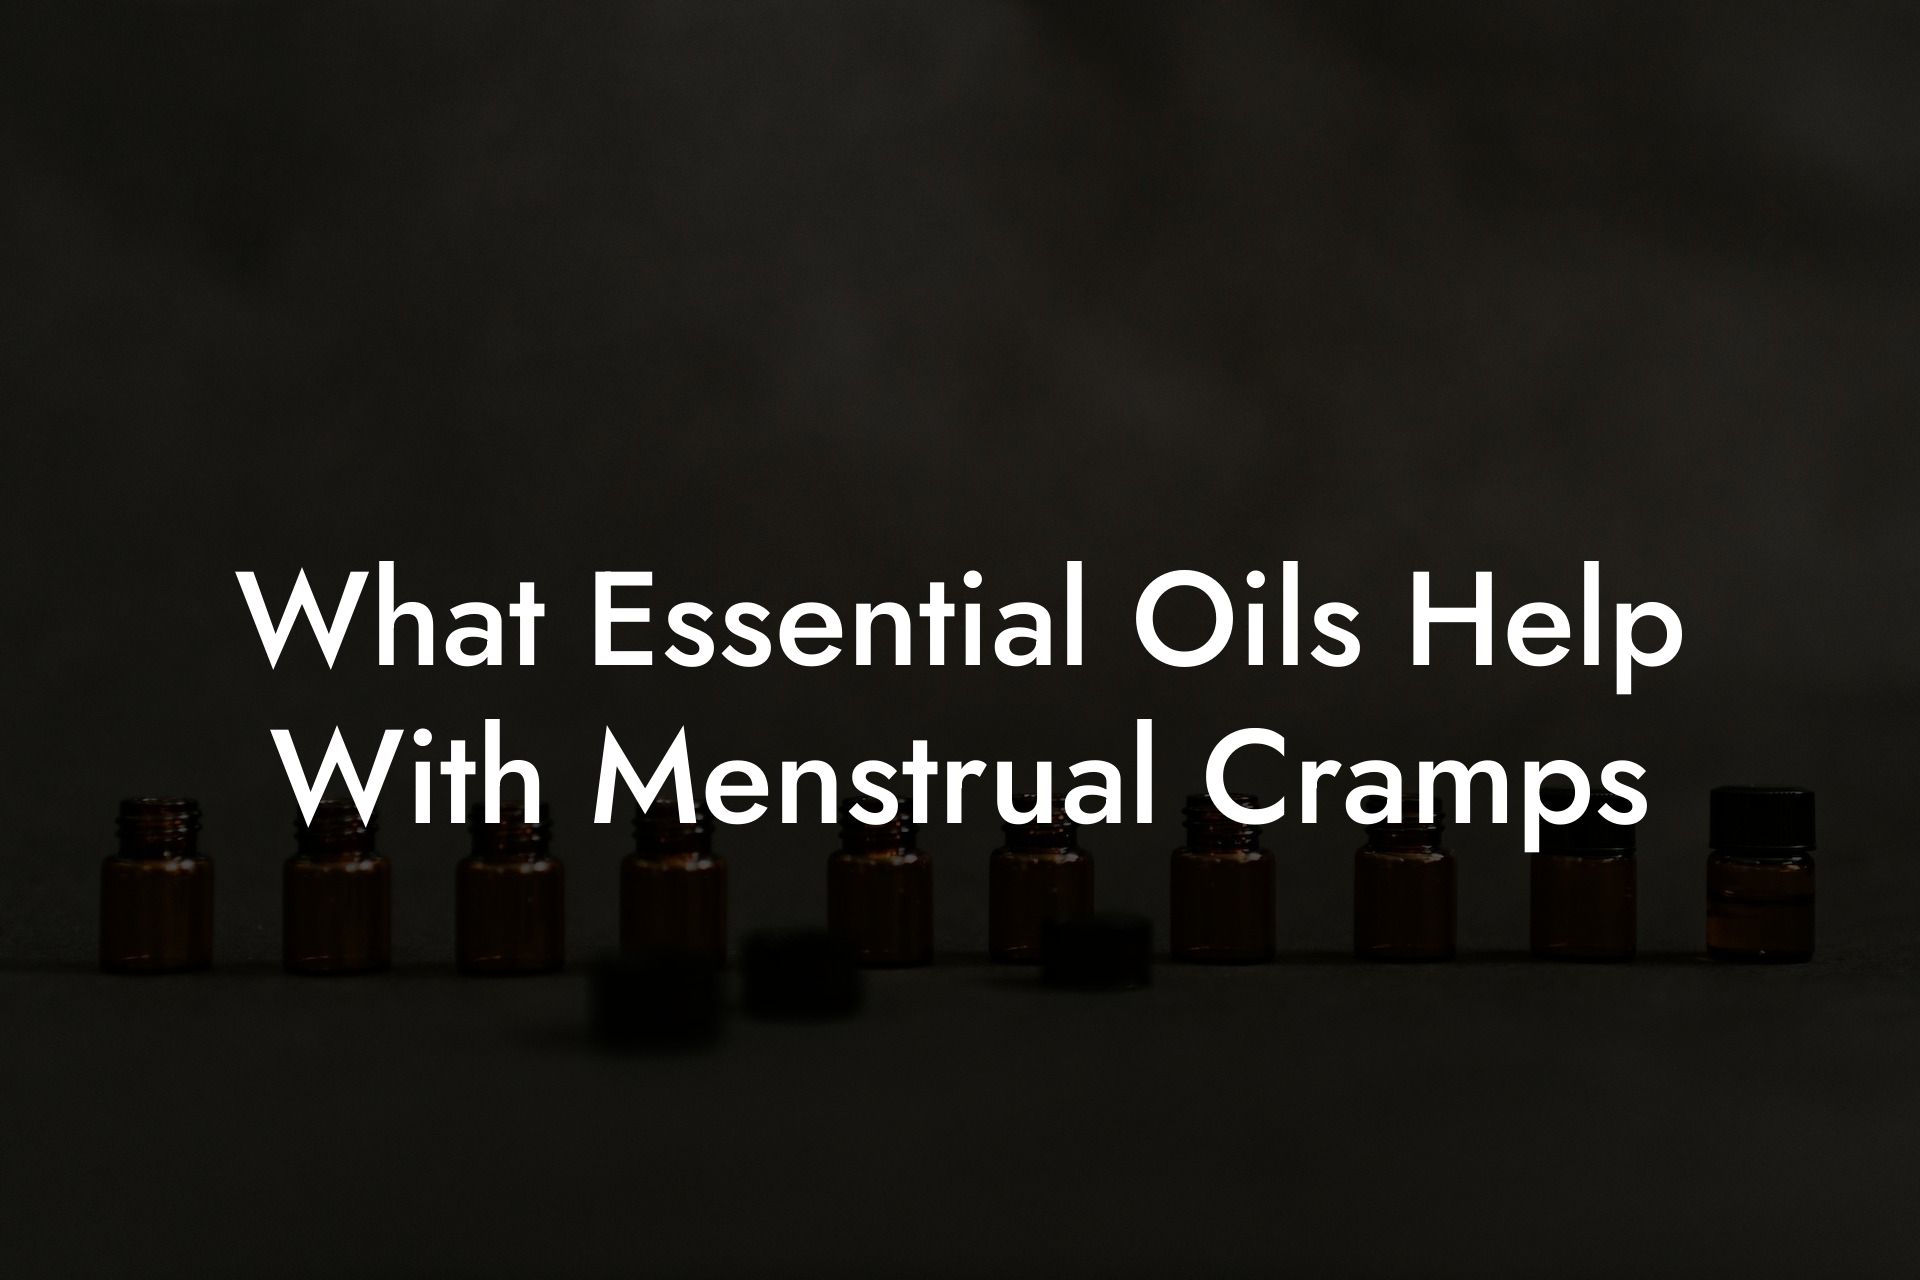 What Essential Oils Help With Menstrual Cramps